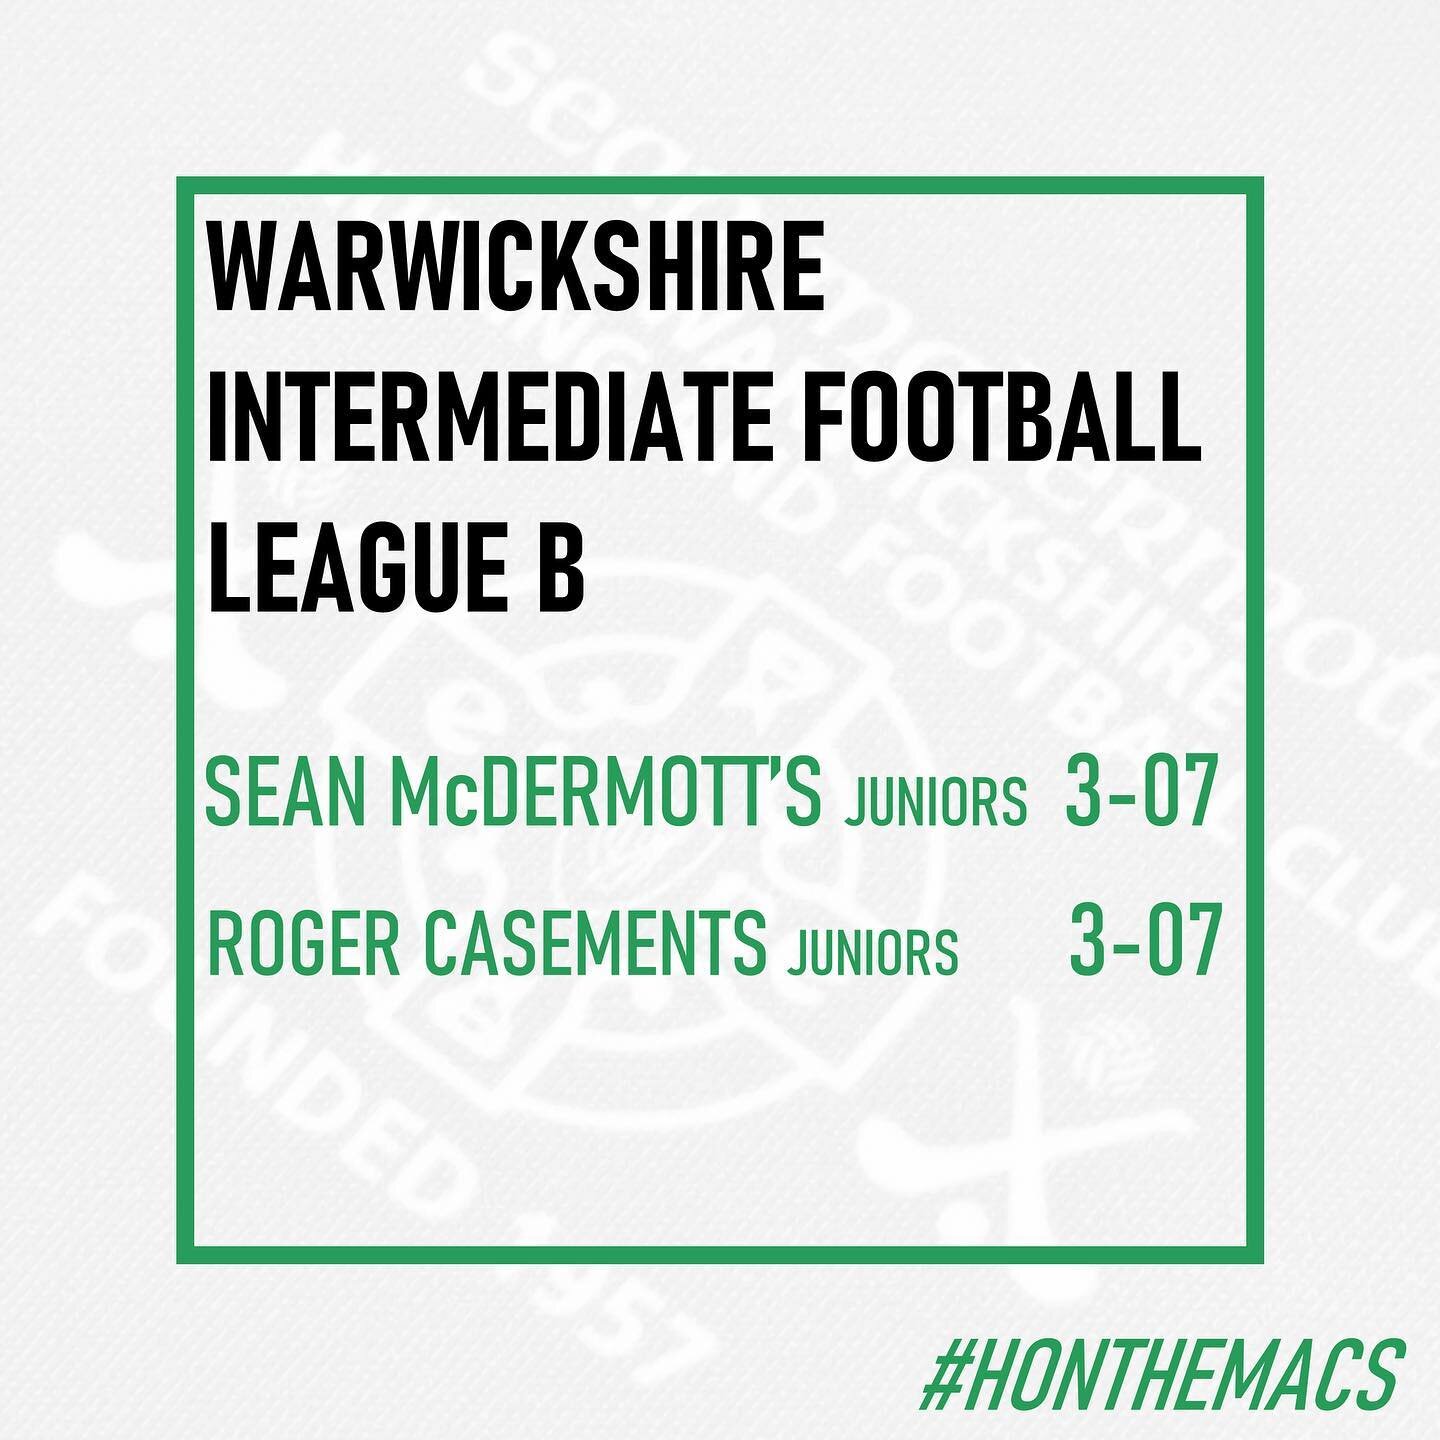 A hard-fought draw in Coventry as our juniors remain unbeaten in the league.

#honthemacs